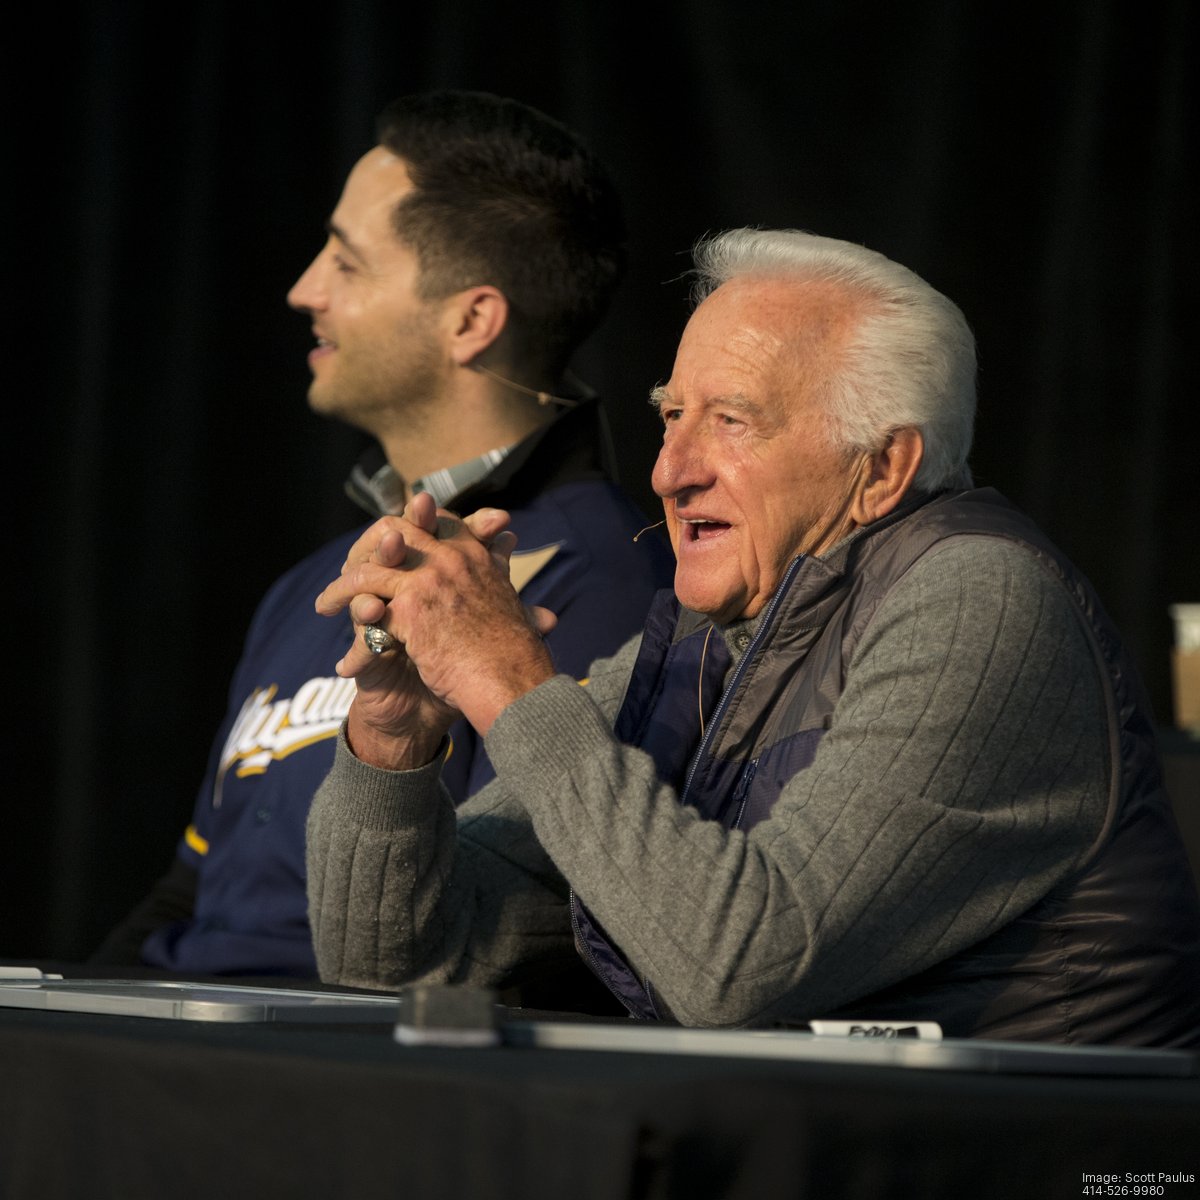 One-on-one with Brewers legend Bob Uecker